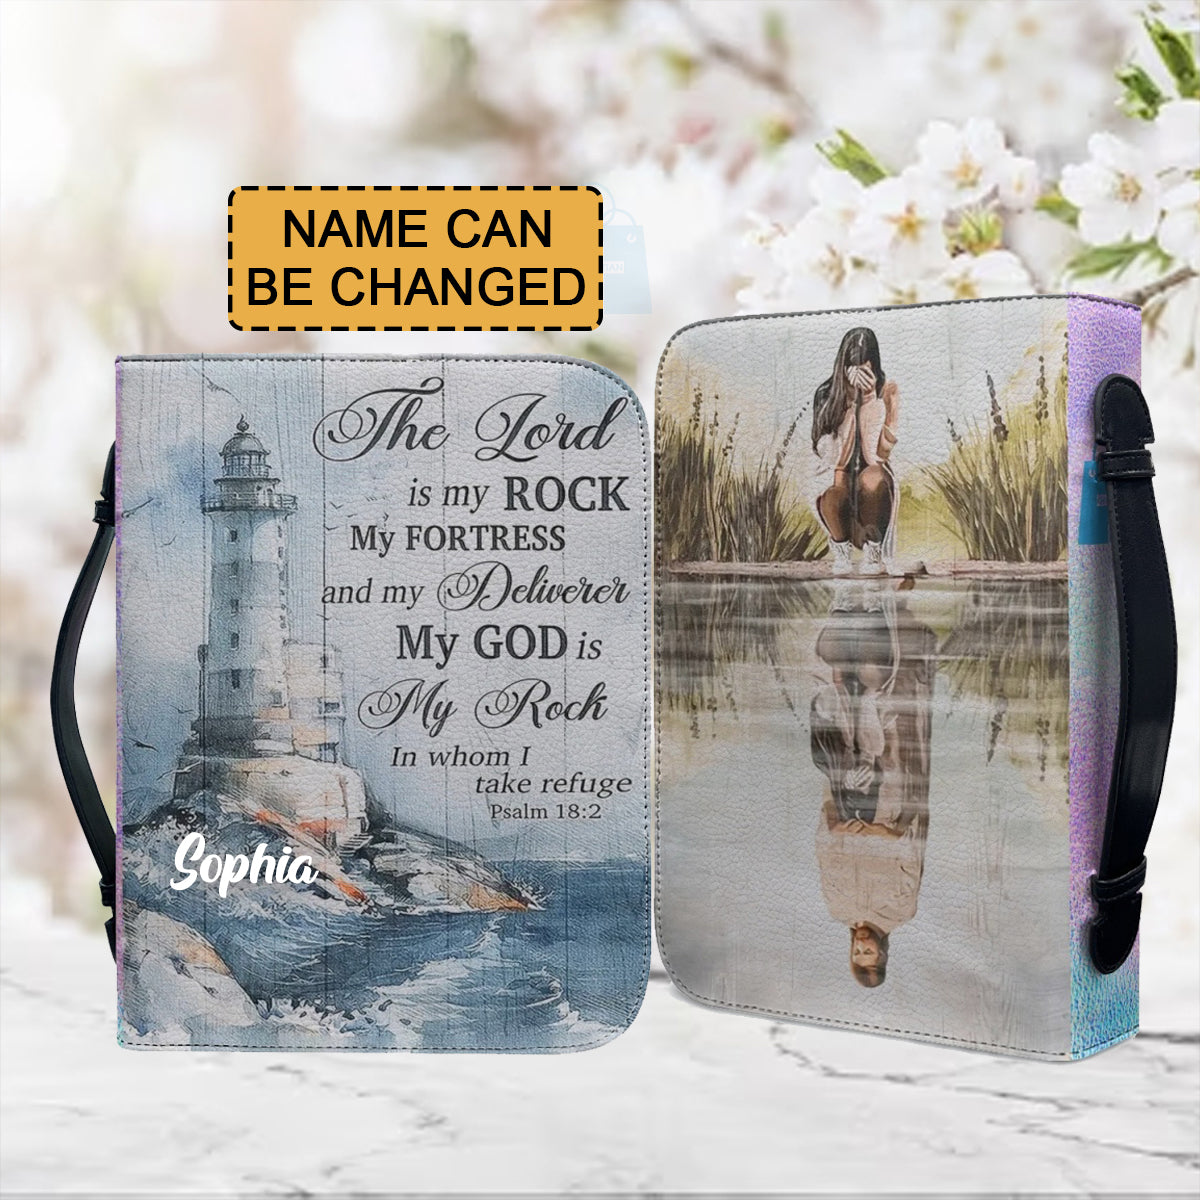 Christianartbag Bible Cover, The Lord Is My Rock Bible Cover, Personalized Bible Cover, Christ Lighthouse Bible Cover, Christian Gifts, CAB02021123. - Christian Art Bag